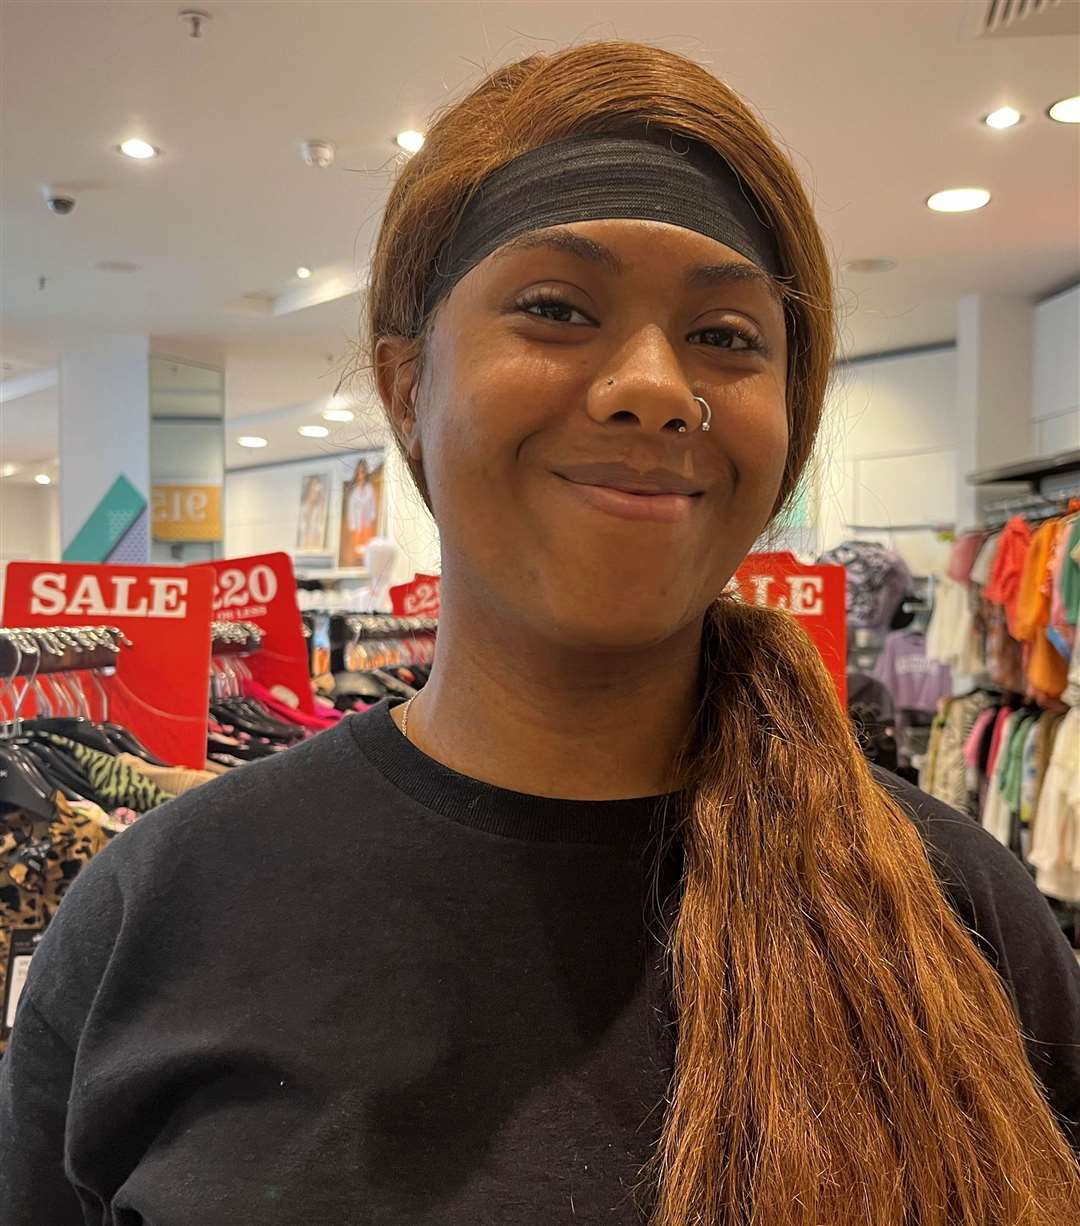 Shop worker India Smith, 19,